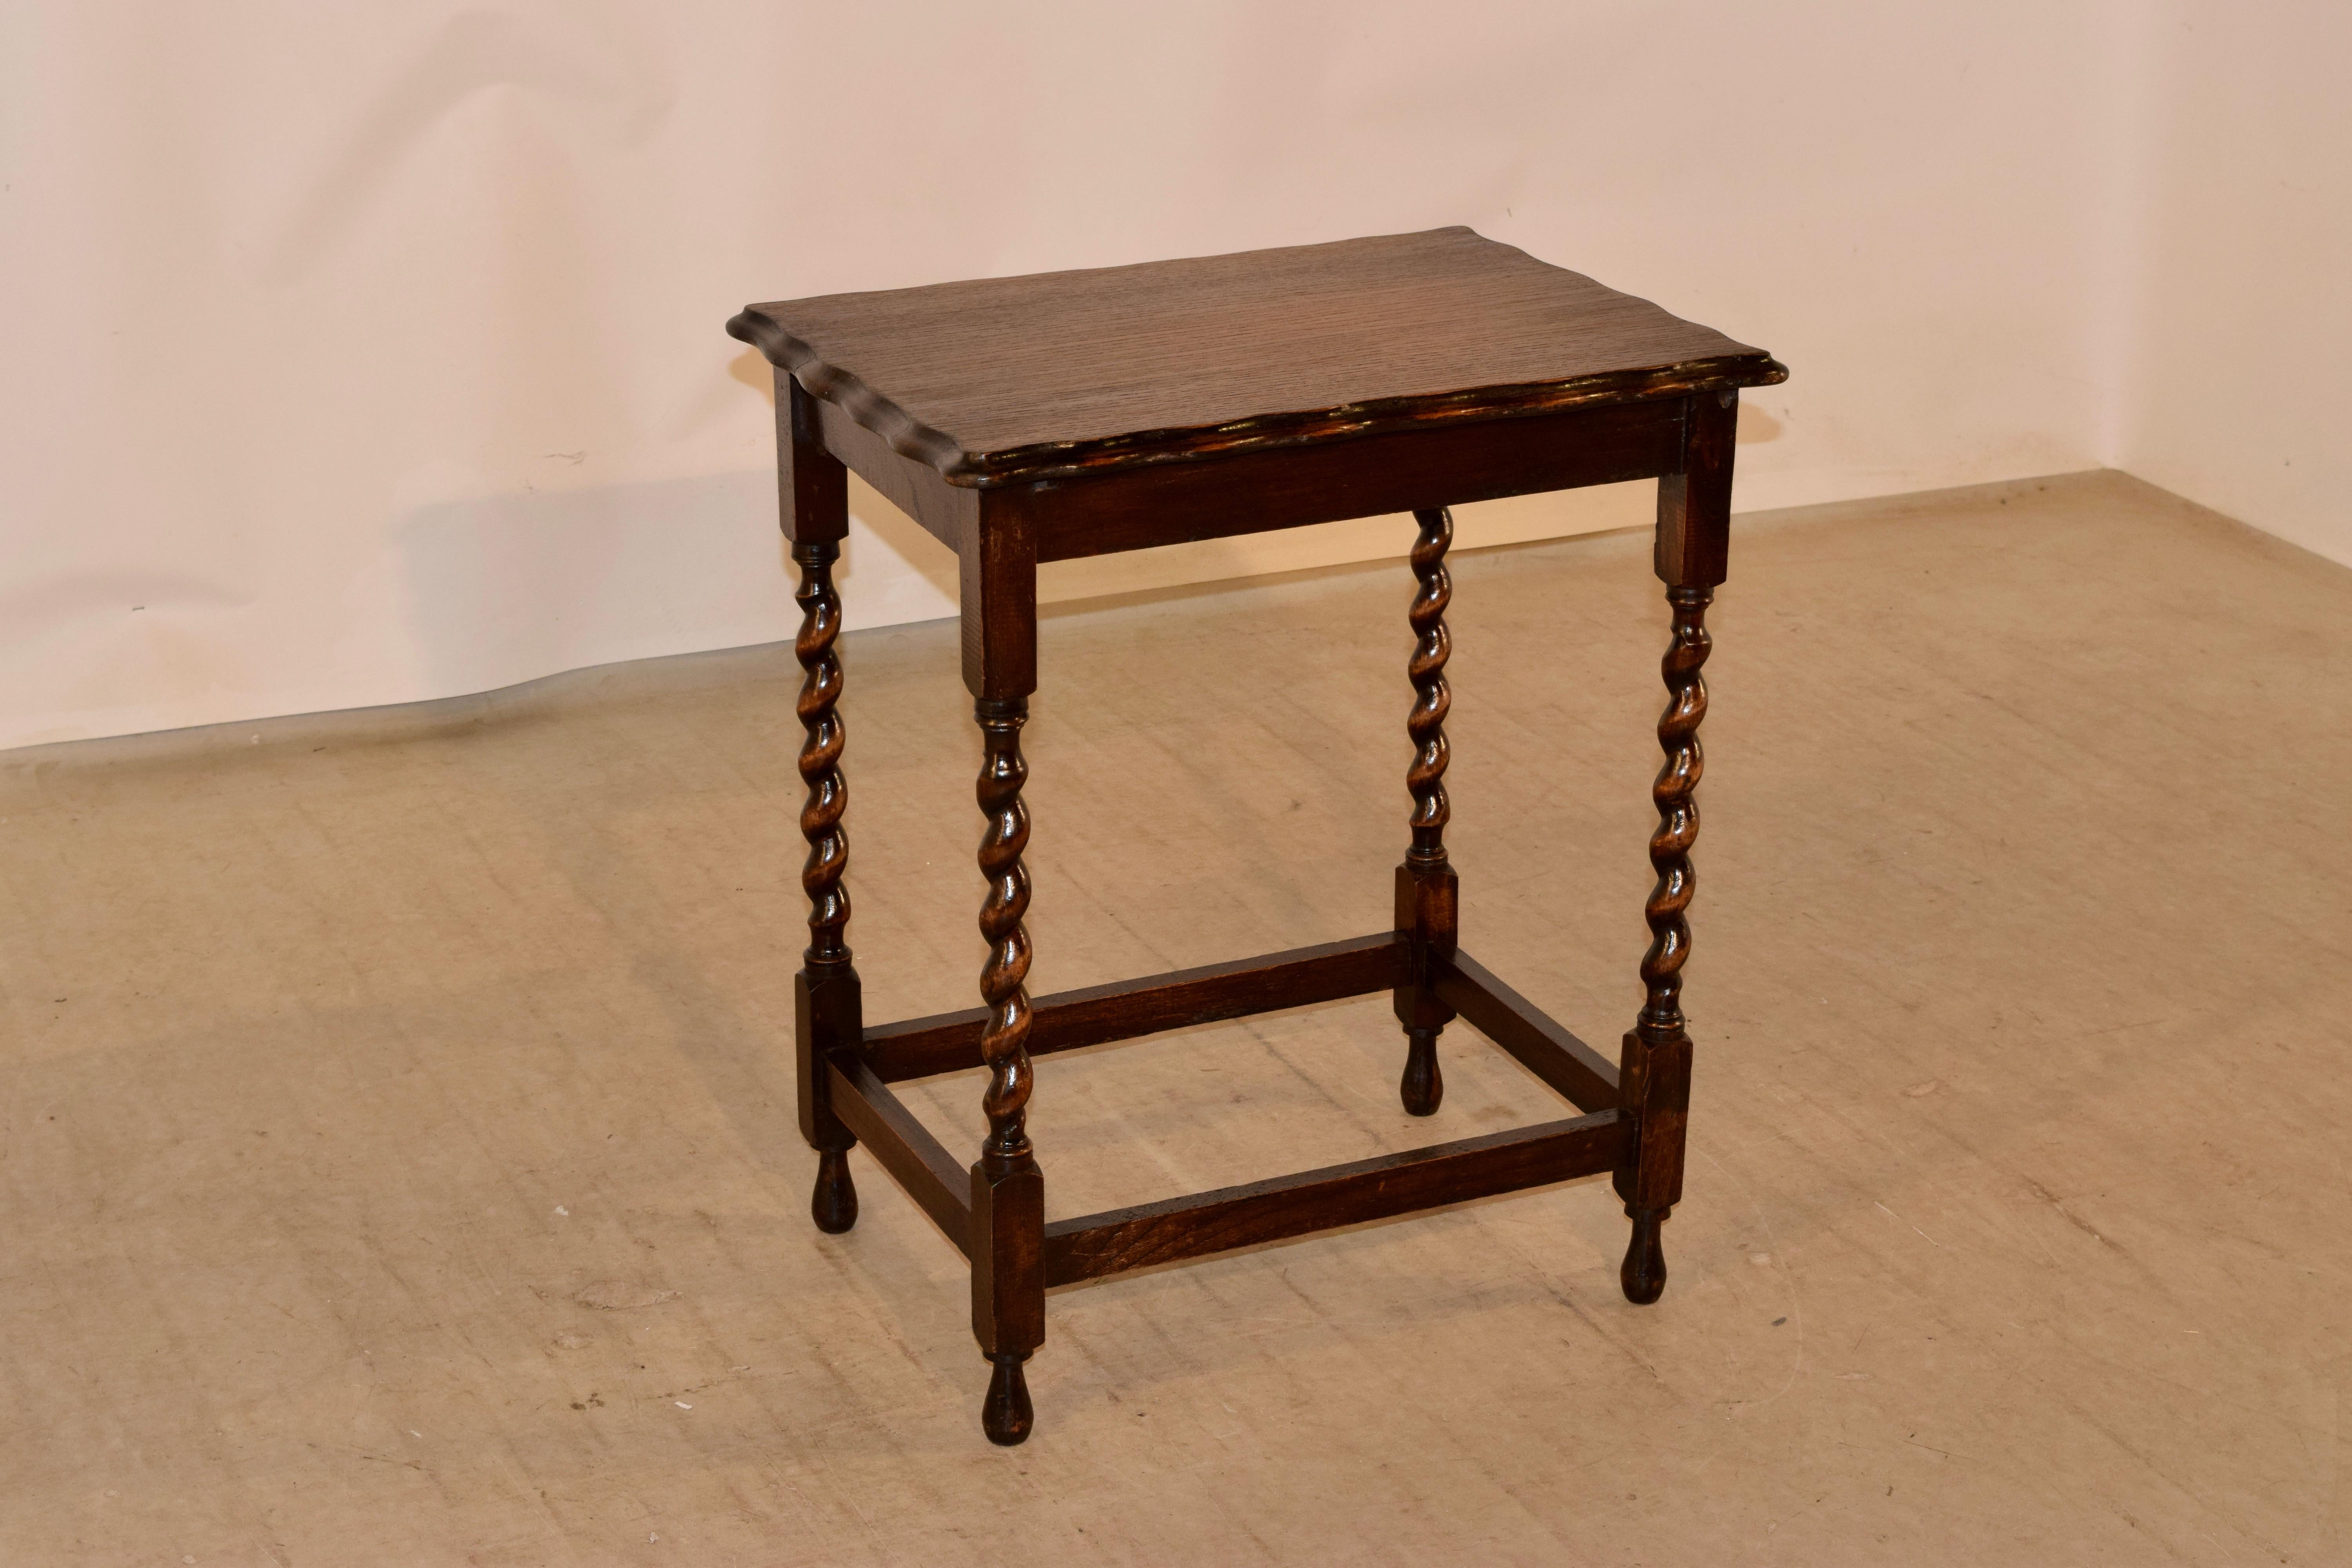 Circa 1900 English oak occasional table with a beveled and scalloped edge around the top, following down to a simple apron and raised on hand turned barley twist legs, joined by simple stretchers and supported on hand turned feet.